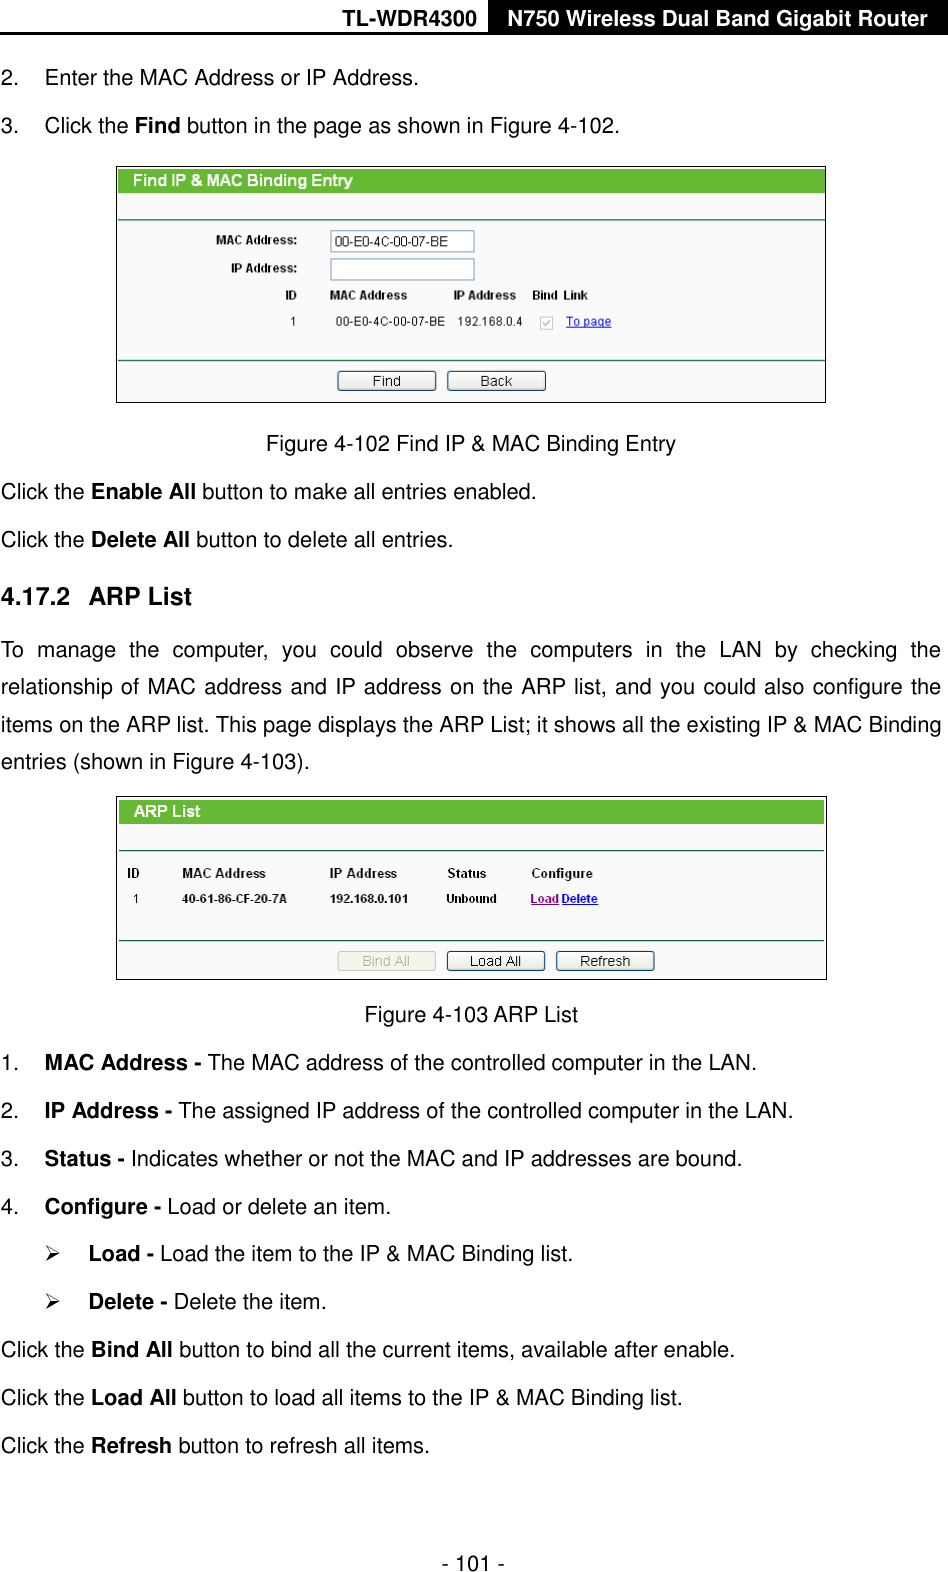 TL-WDR4300 N750 Wireless Dual Band Gigabit Router  - 101 - 2.  Enter the MAC Address or IP Address. 3.  Click the Find button in the page as shown in Figure 4-102.  Figure 4-102 Find IP &amp; MAC Binding Entry Click the Enable All button to make all entries enabled. Click the Delete All button to delete all entries. 4.17.2  ARP List To  manage  the  computer,  you  could  observe  the  computers  in  the  LAN  by  checking  the relationship of MAC address and IP address on the ARP list, and you could also configure the items on the ARP list. This page displays the ARP List; it shows all the existing IP &amp; MAC Binding entries (shown in Figure 4-103).      Figure 4-103 ARP List 1. MAC Address - The MAC address of the controlled computer in the LAN.   2. IP Address - The assigned IP address of the controlled computer in the LAN.   3. Status - Indicates whether or not the MAC and IP addresses are bound. 4. Configure - Load or delete an item.    Load - Load the item to the IP &amp; MAC Binding list.    Delete - Delete the item.   Click the Bind All button to bind all the current items, available after enable. Click the Load All button to load all items to the IP &amp; MAC Binding list. Click the Refresh button to refresh all items. 